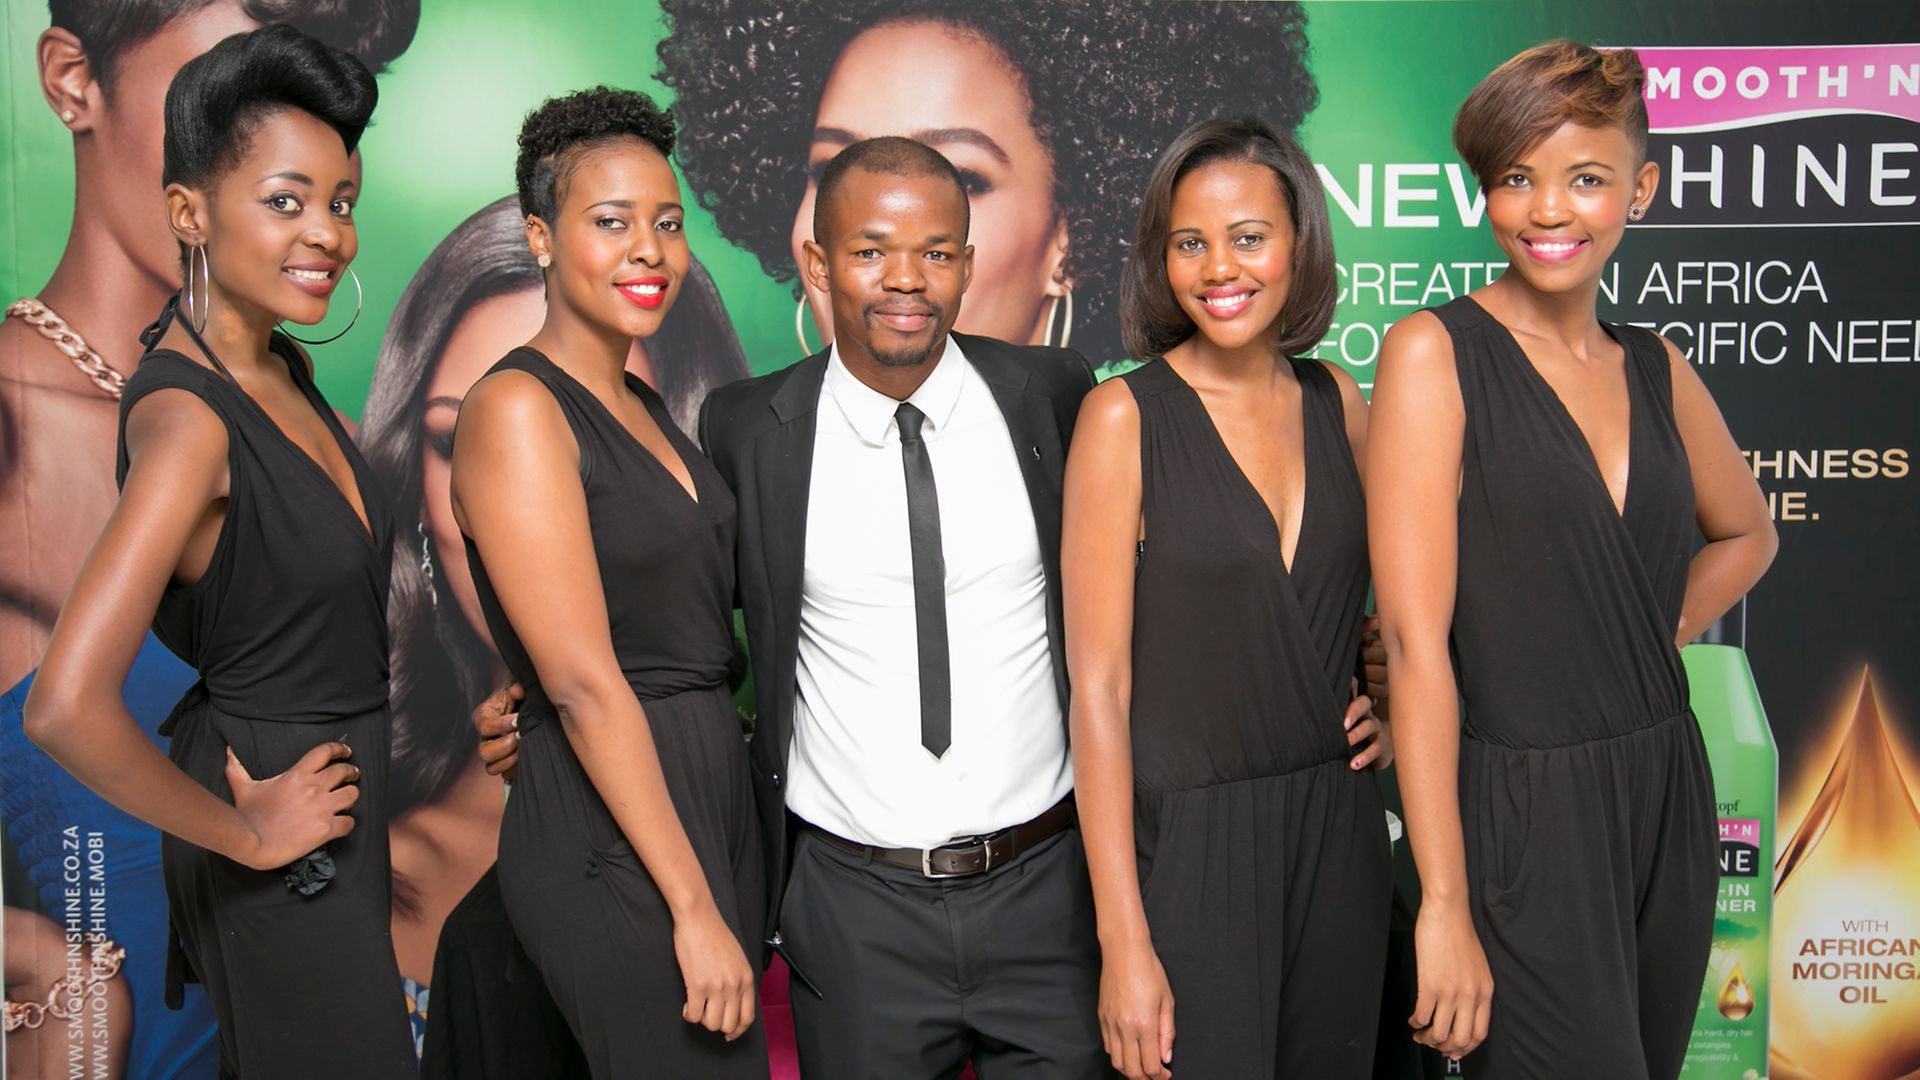 Joshua Ndala, from Schwarzkopf South Africa, (centre) with models 